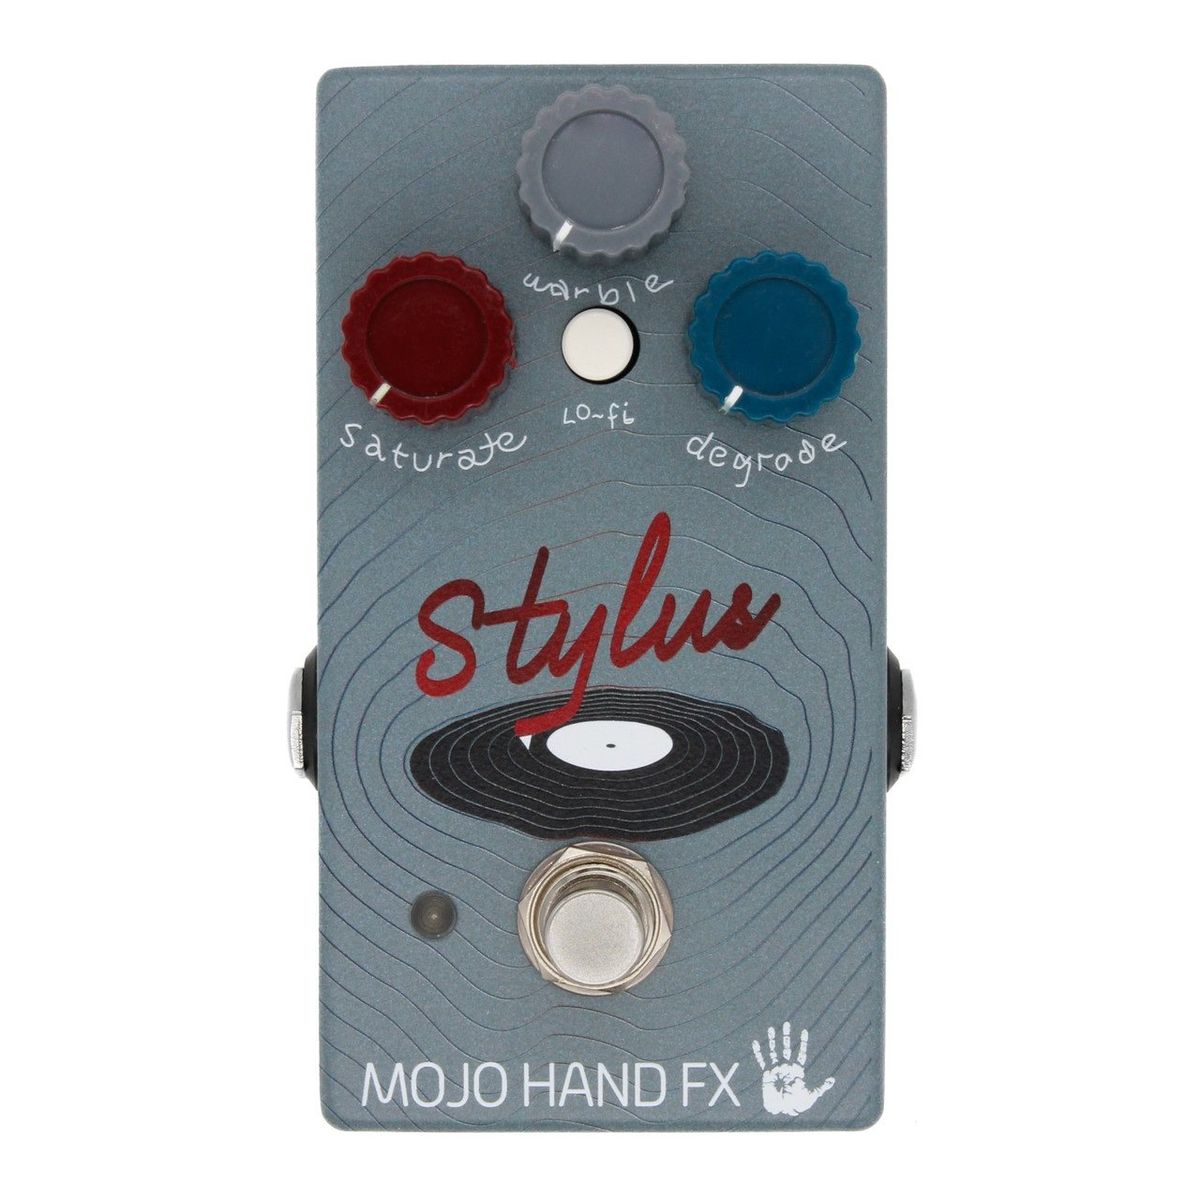 Mojo Hand FX Stylus Review